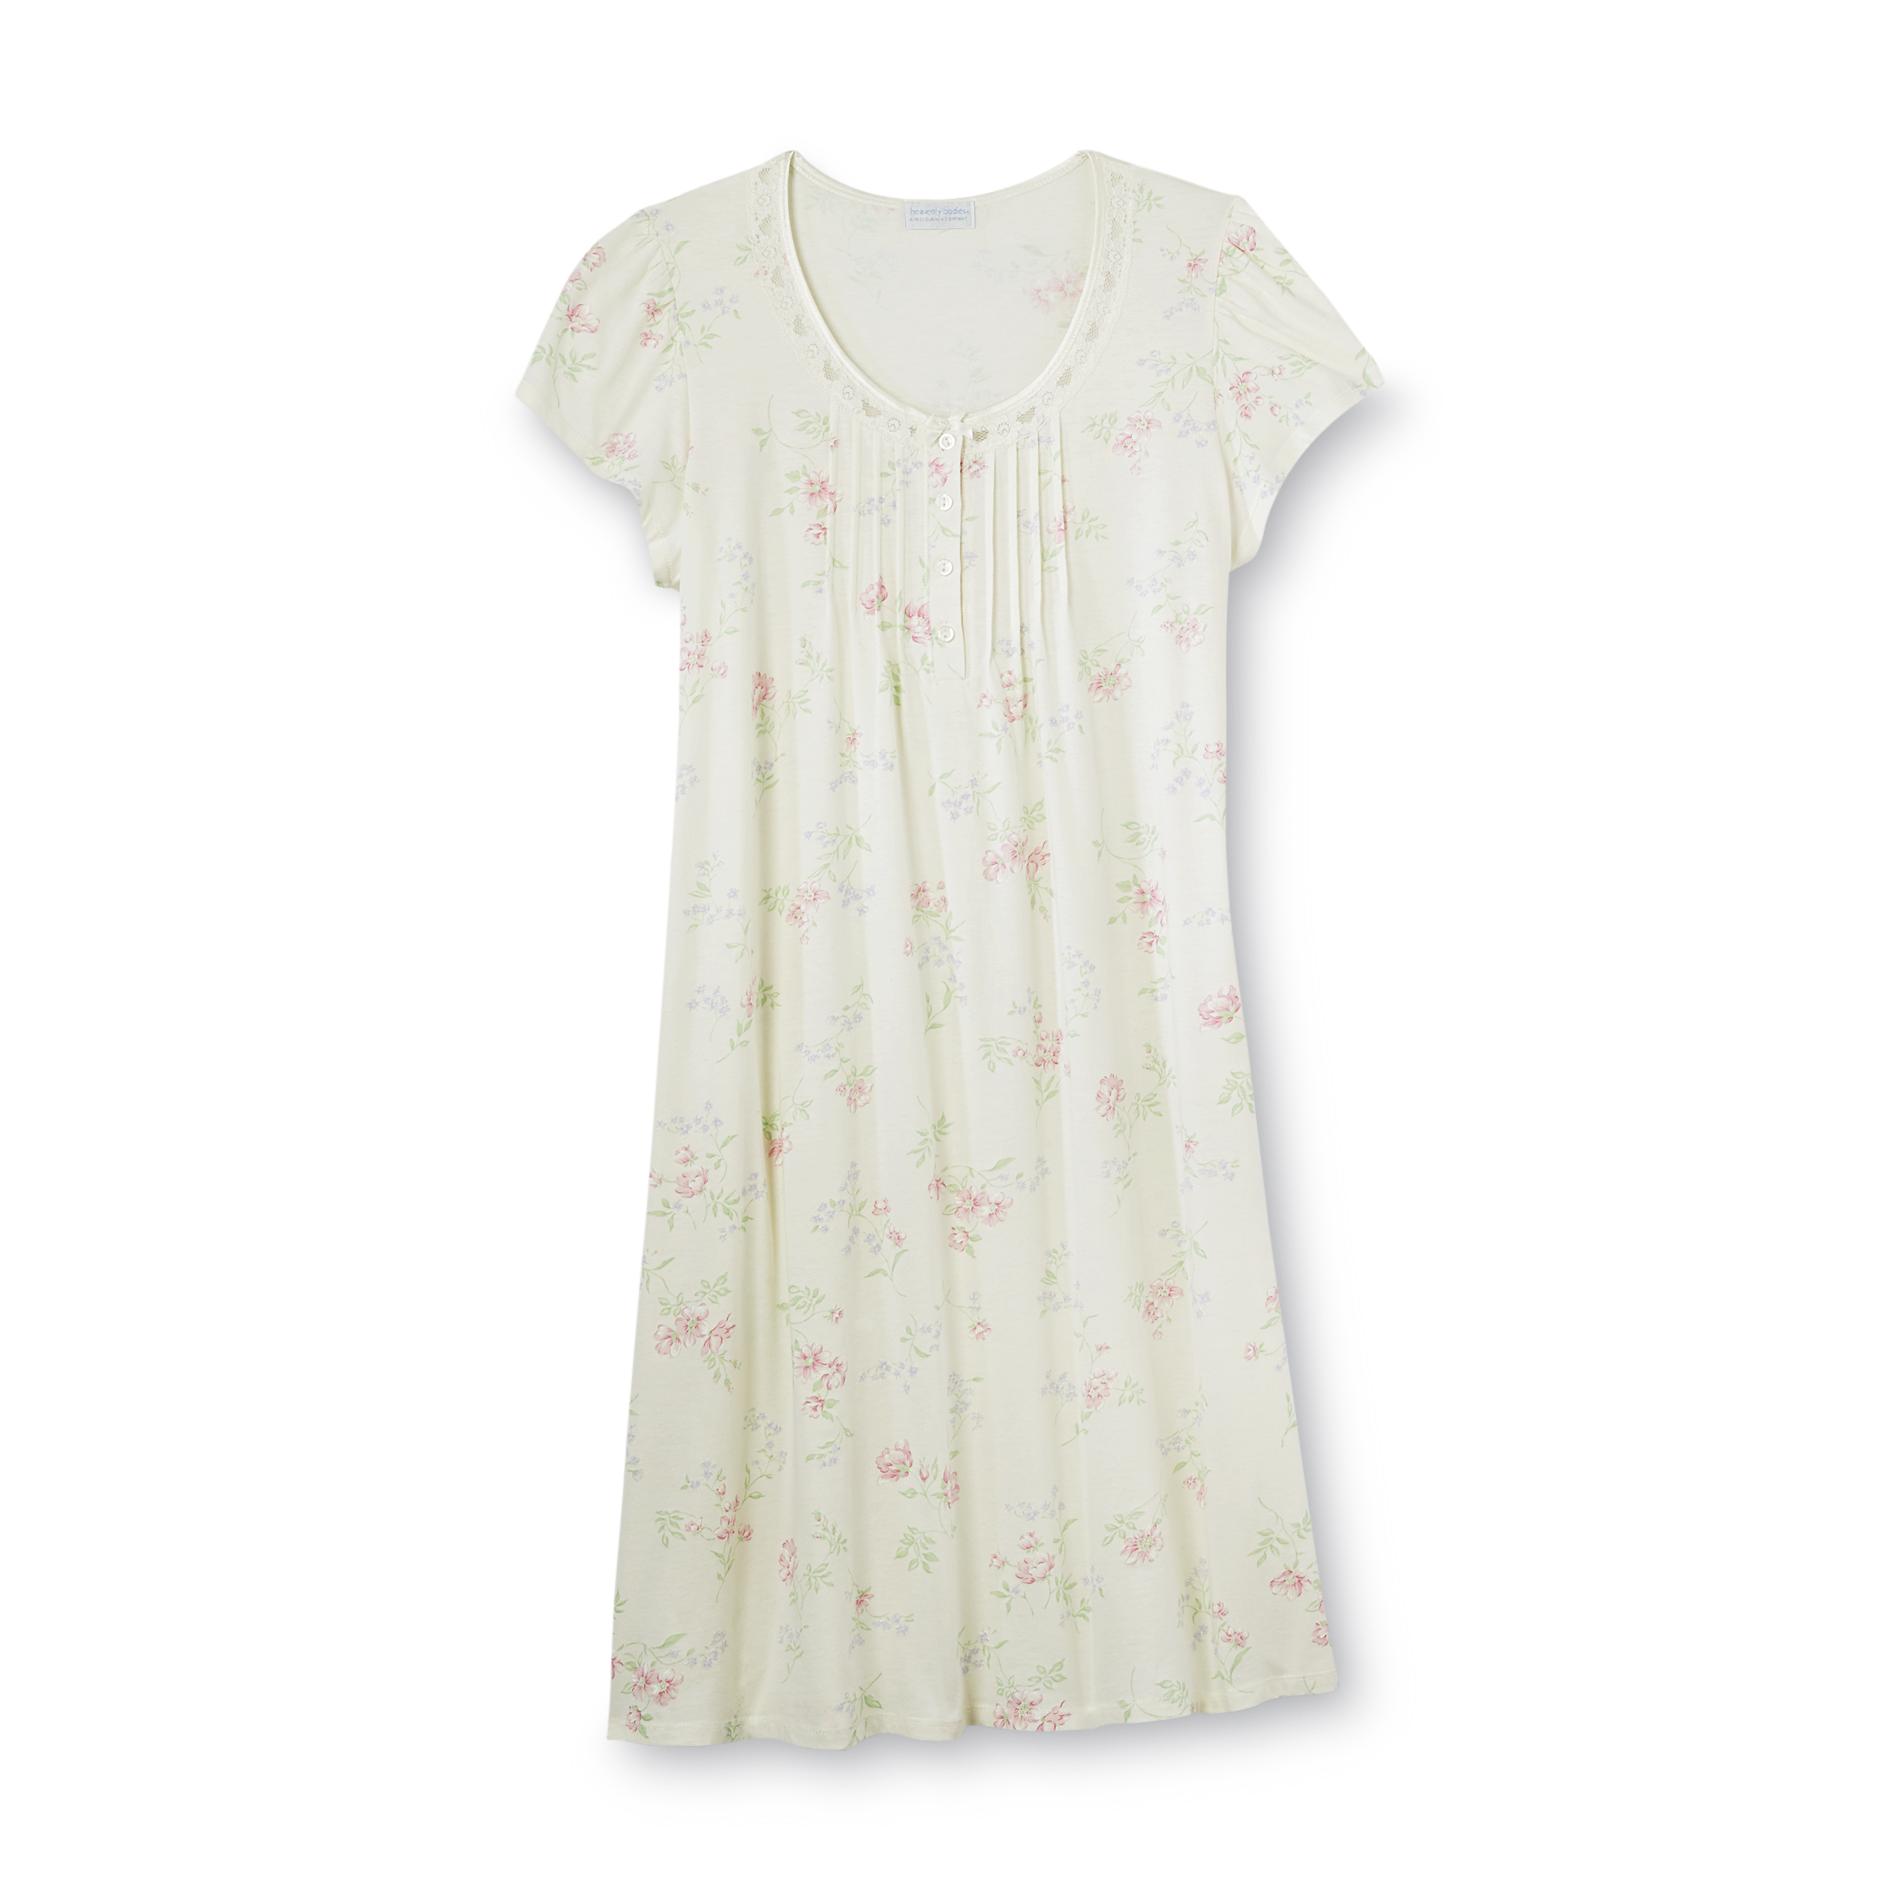 Heavenly Bodies by Miss Elaine Women's Cap-Sleeve Pintucked Nightgown - Floral